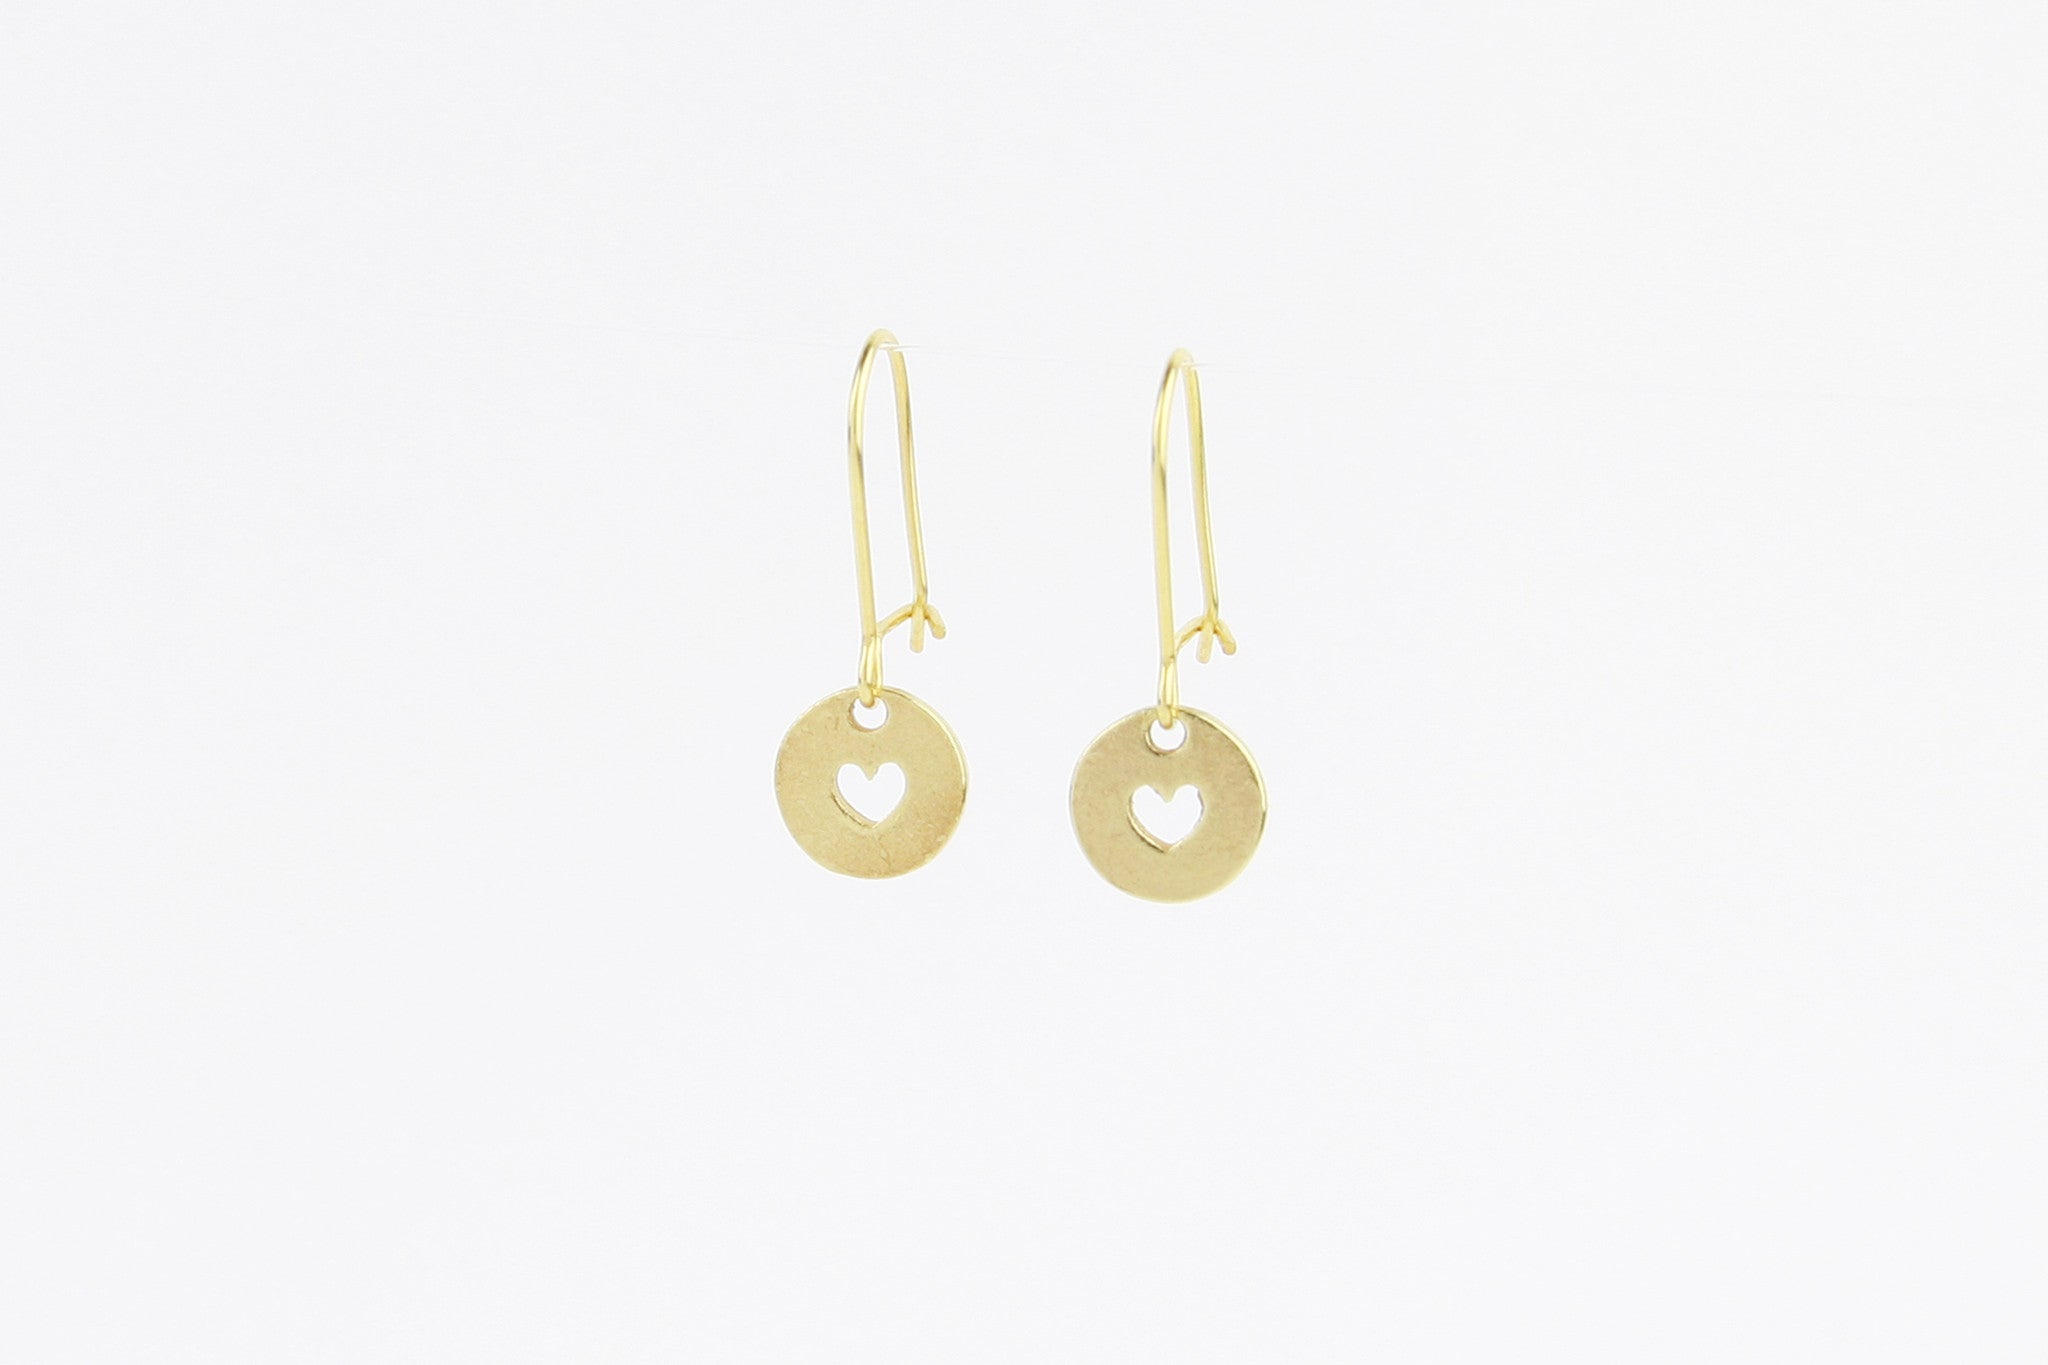 jewelberry ohrringe earrings love token yellow gold plated sterling silver fine jewelry handmade with love fairtrade